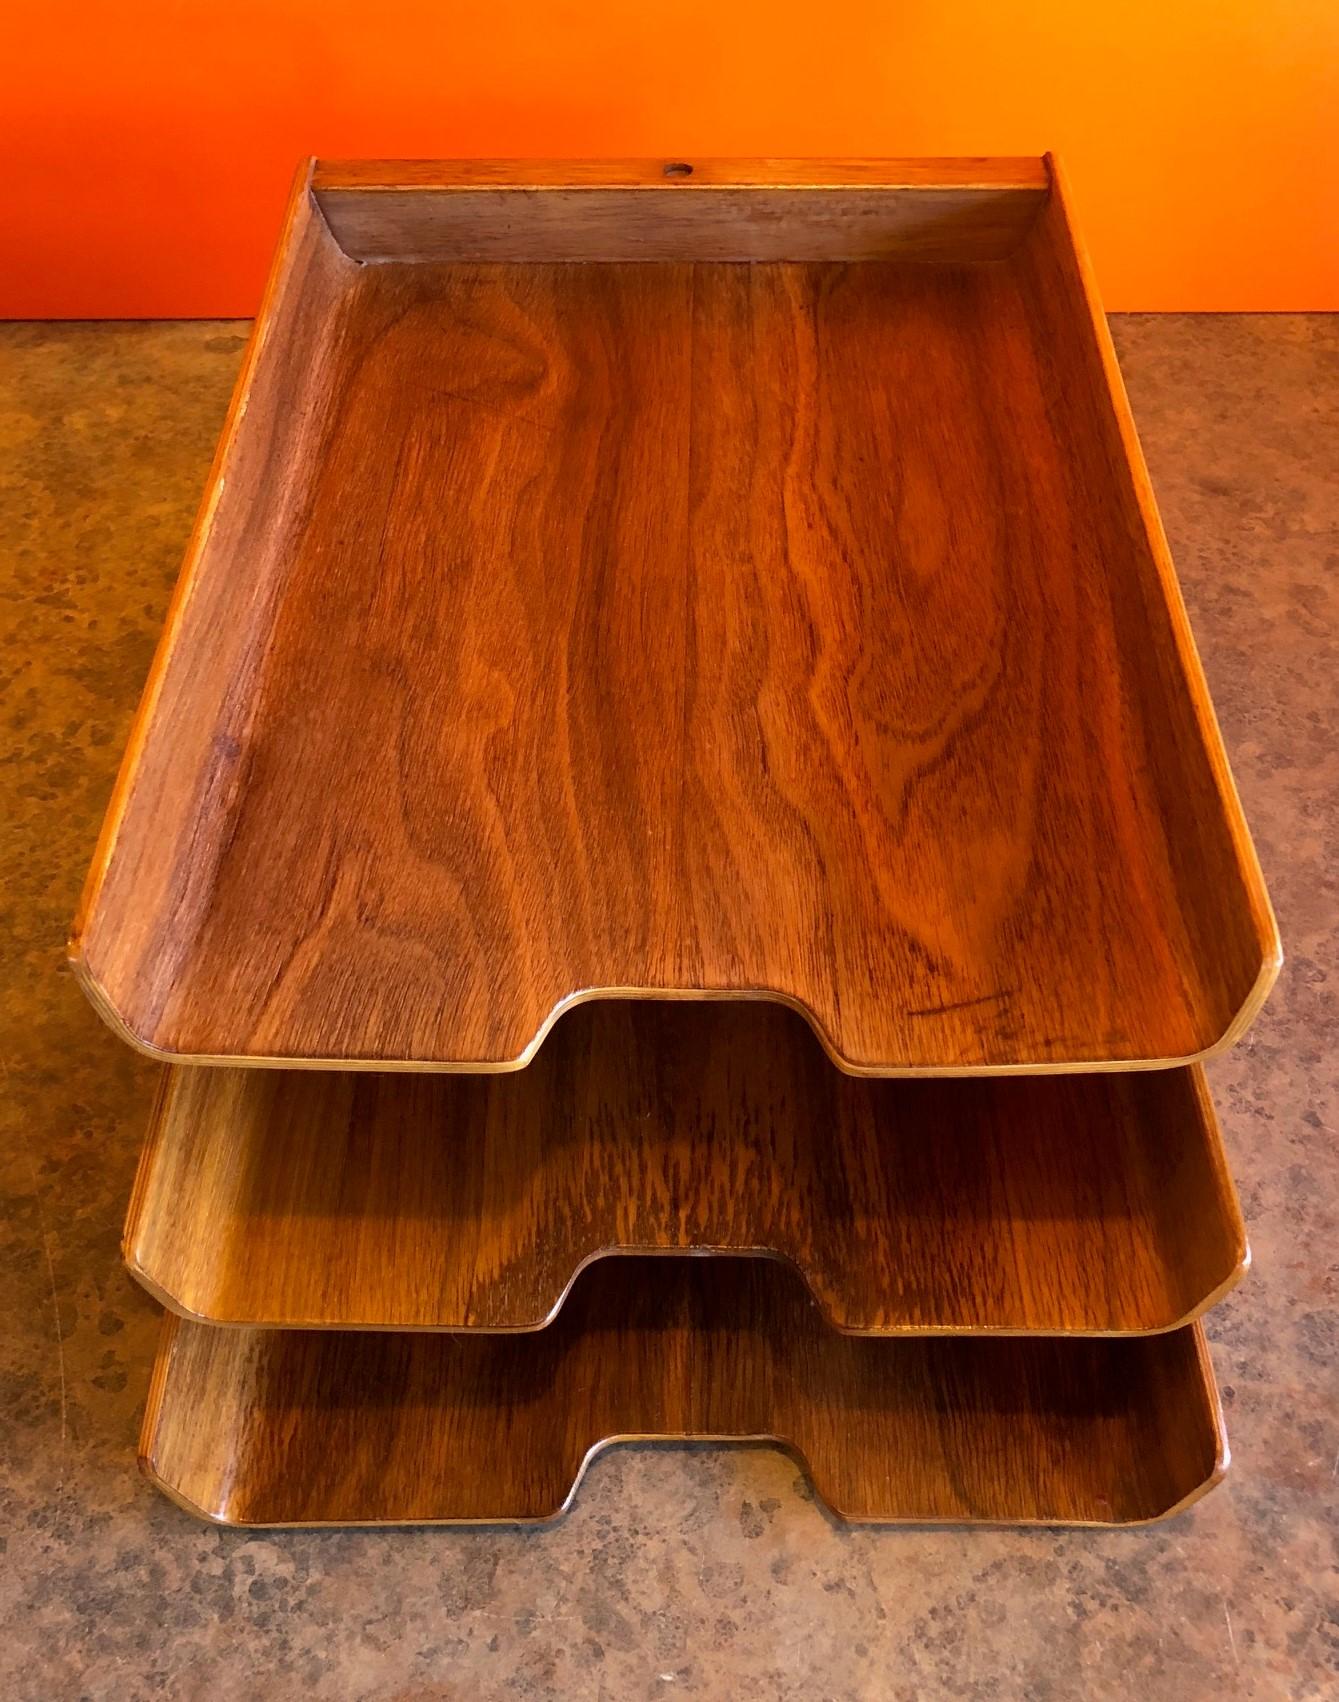 Swedish Molded Teak Plywood Triple Letter Tray by Martin Aberg for Rainbow of Sweden